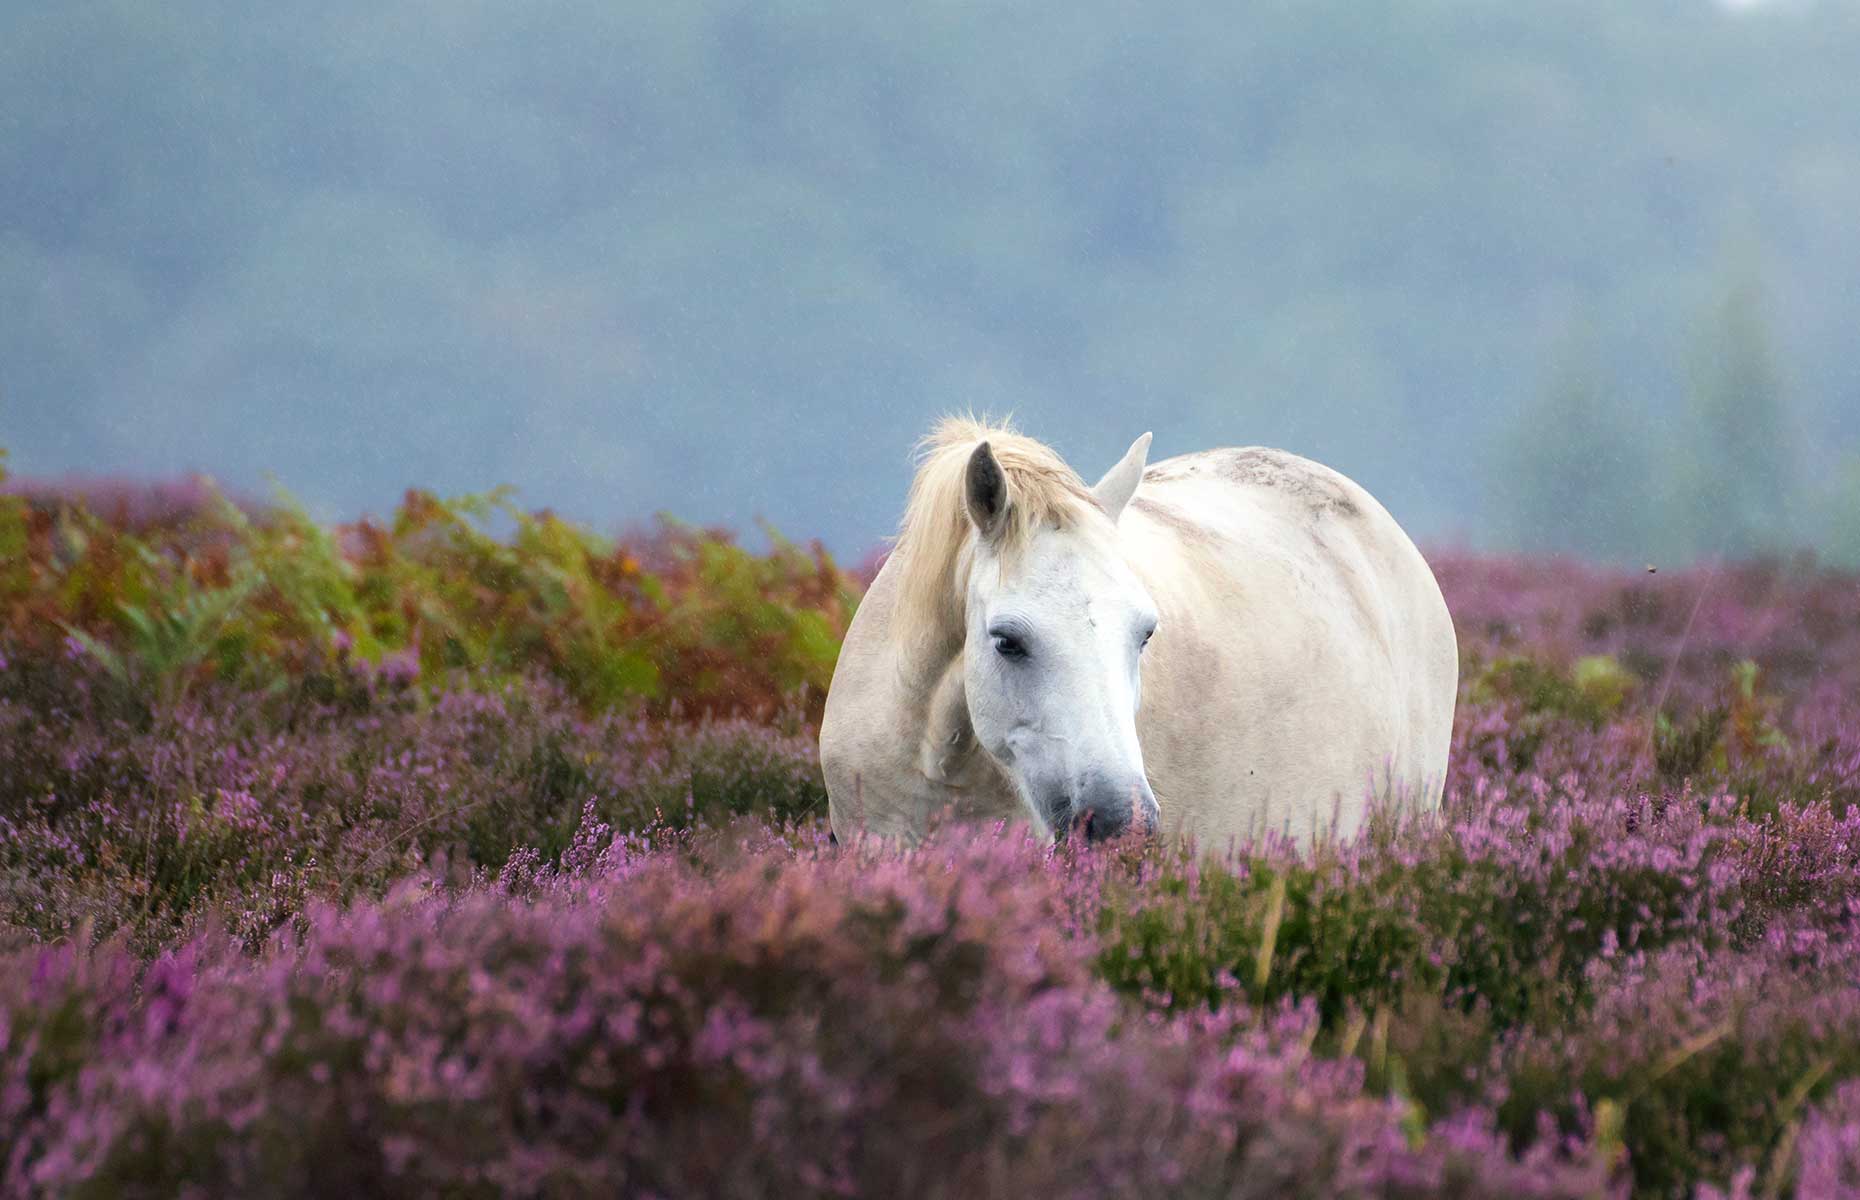 Wild ponies in New Forest National Park Hampshire England (Image: Invisible Edit/Shutterstock)